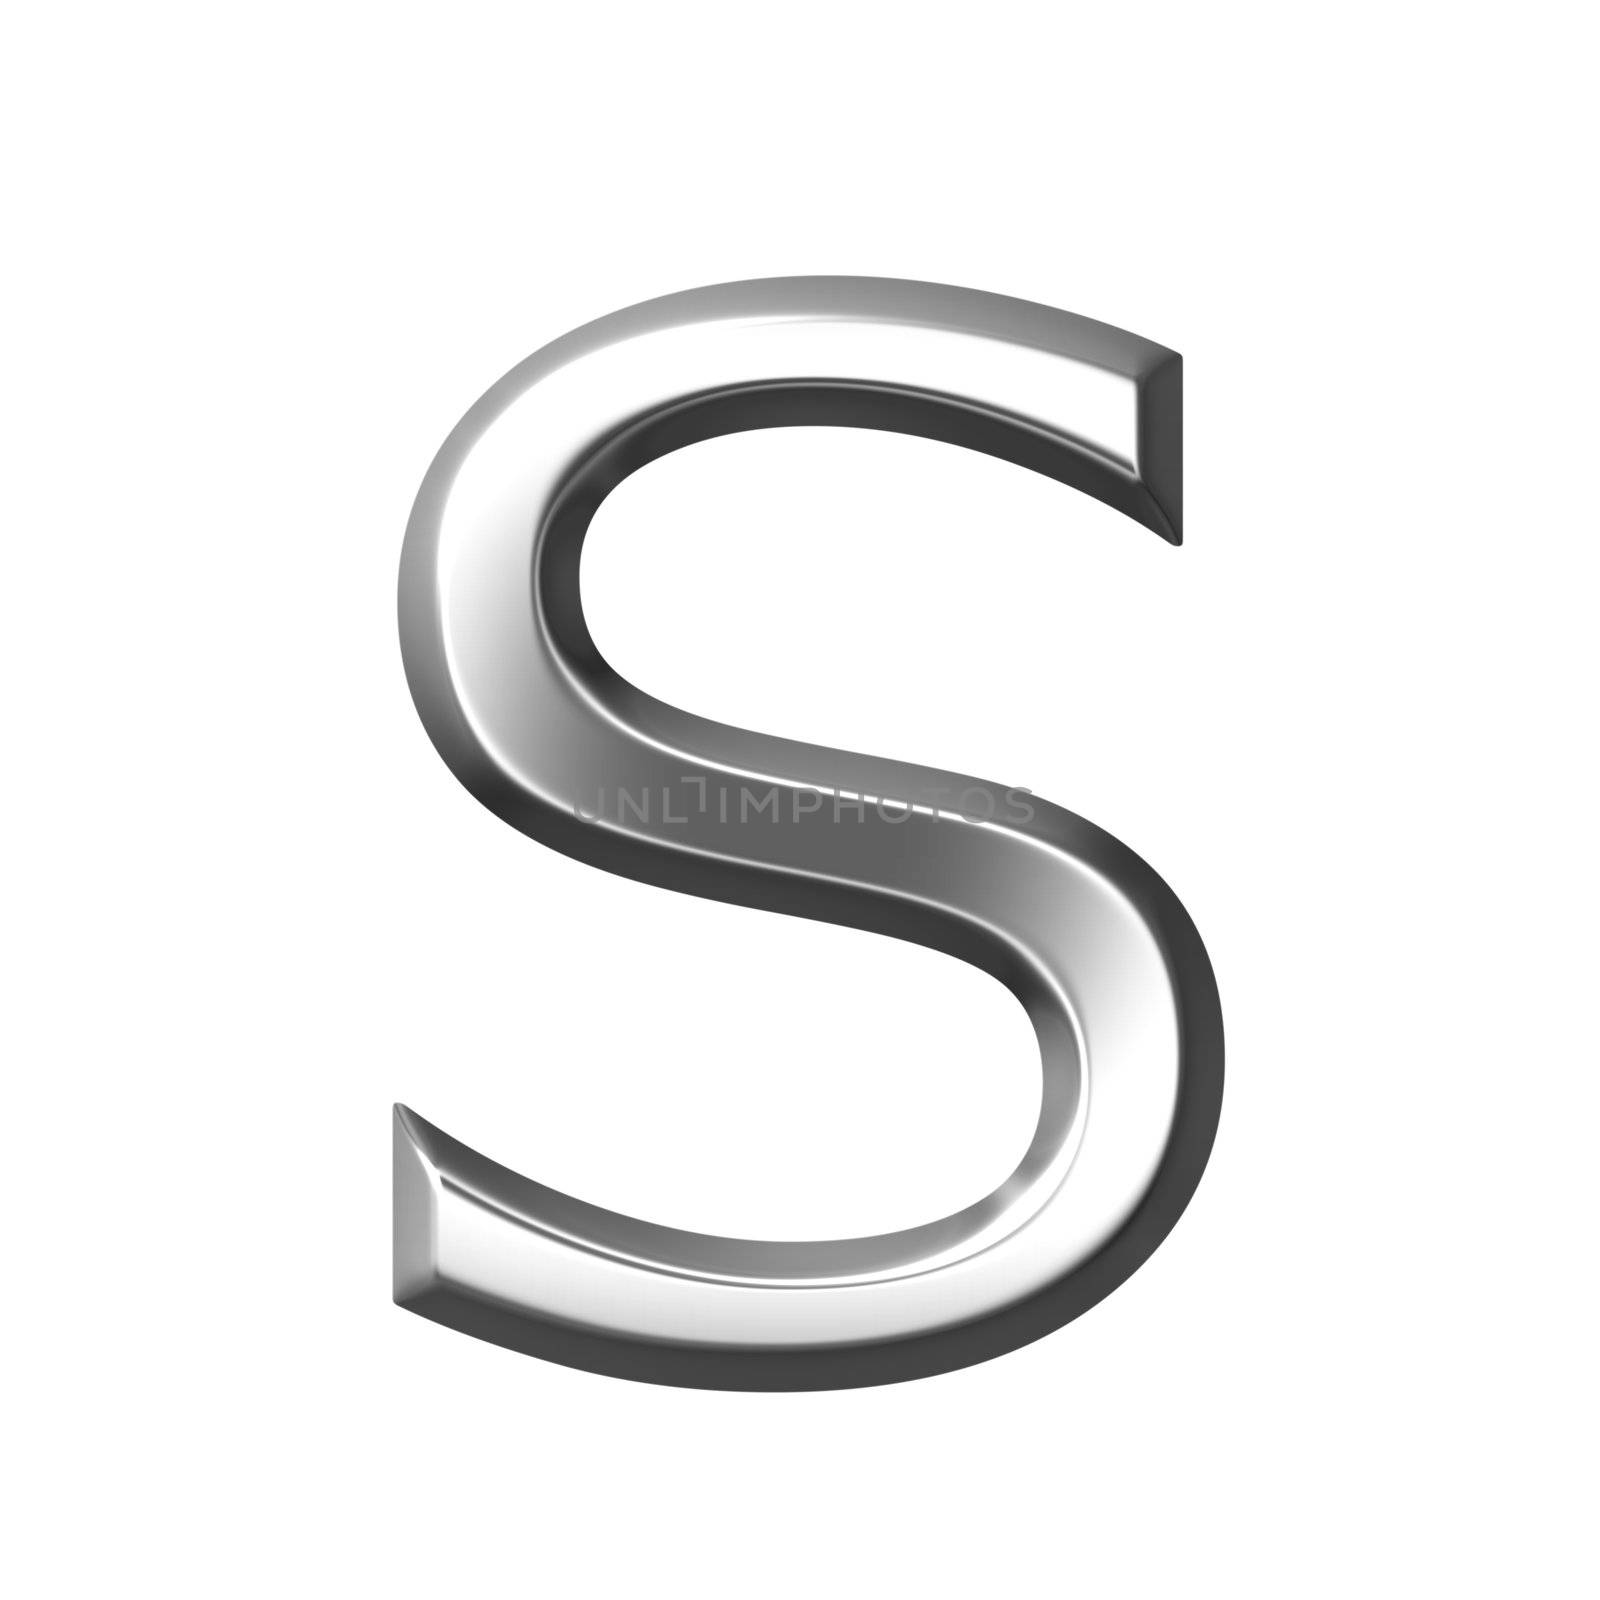 3d silver letter s by Georgios